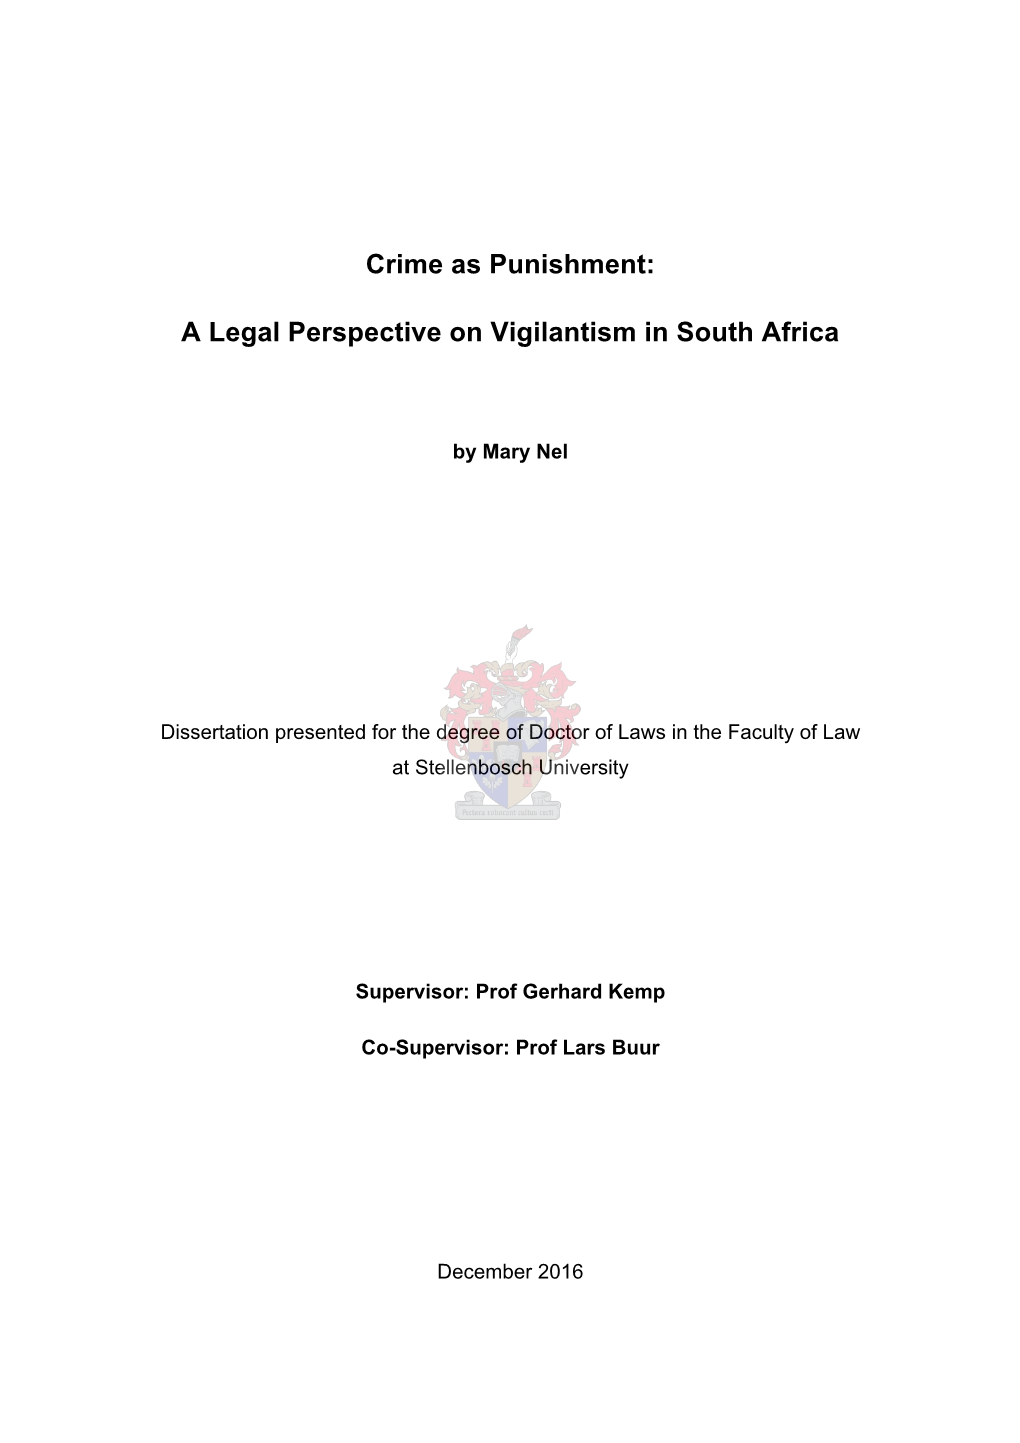 Crime As Punishment: a Legal Perspective on Vigilantism in South